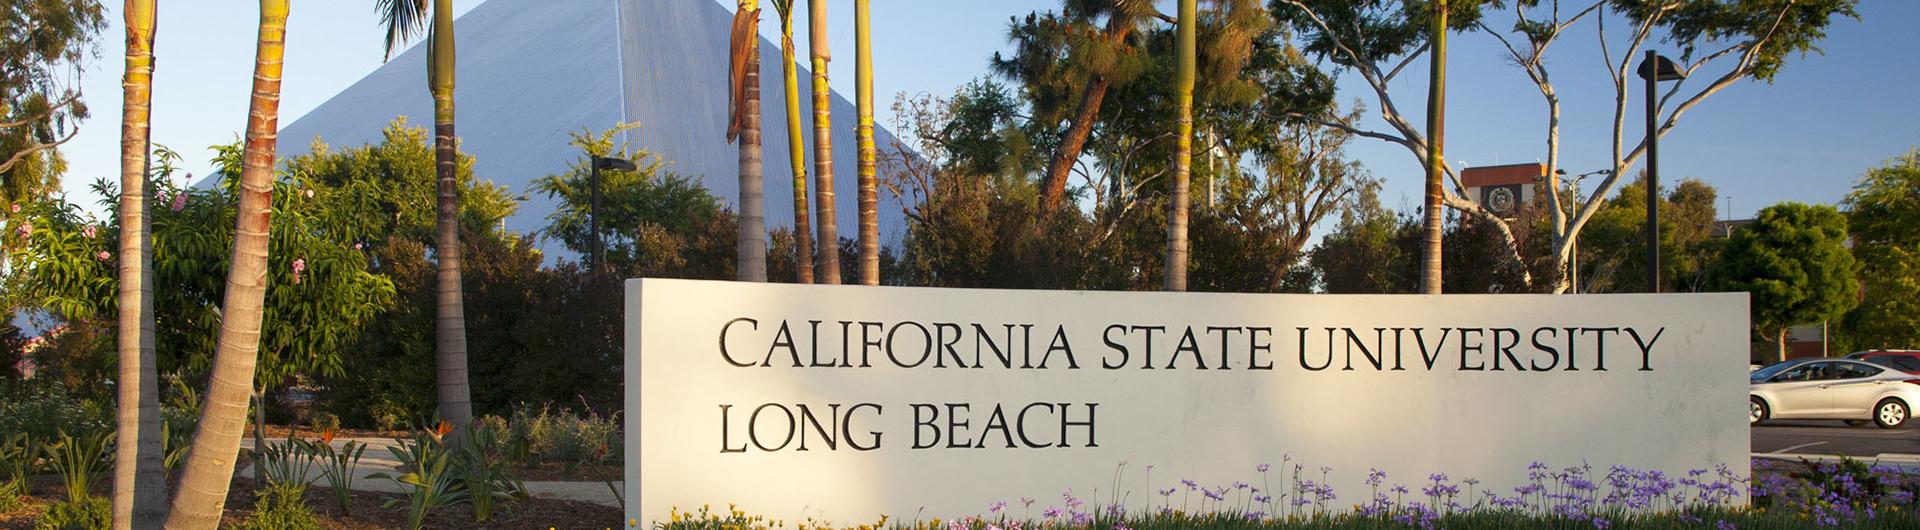 California State University, Long Beach front entrance.